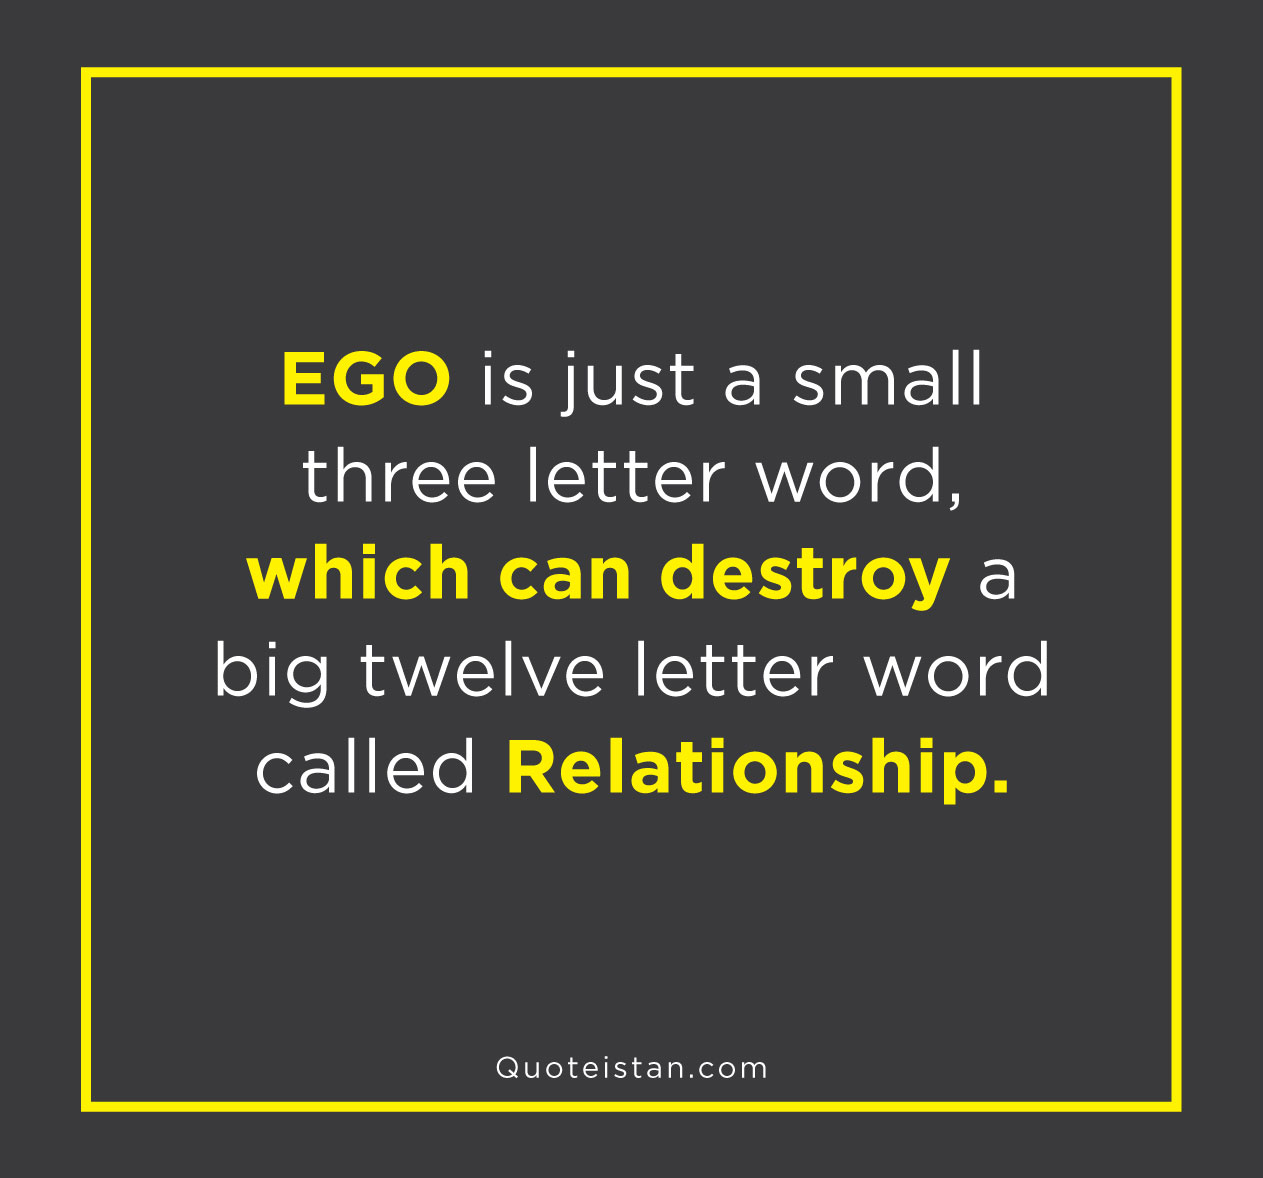 Ego is just a small three letter word, which can destroy a big twelve letter word called Relationship.